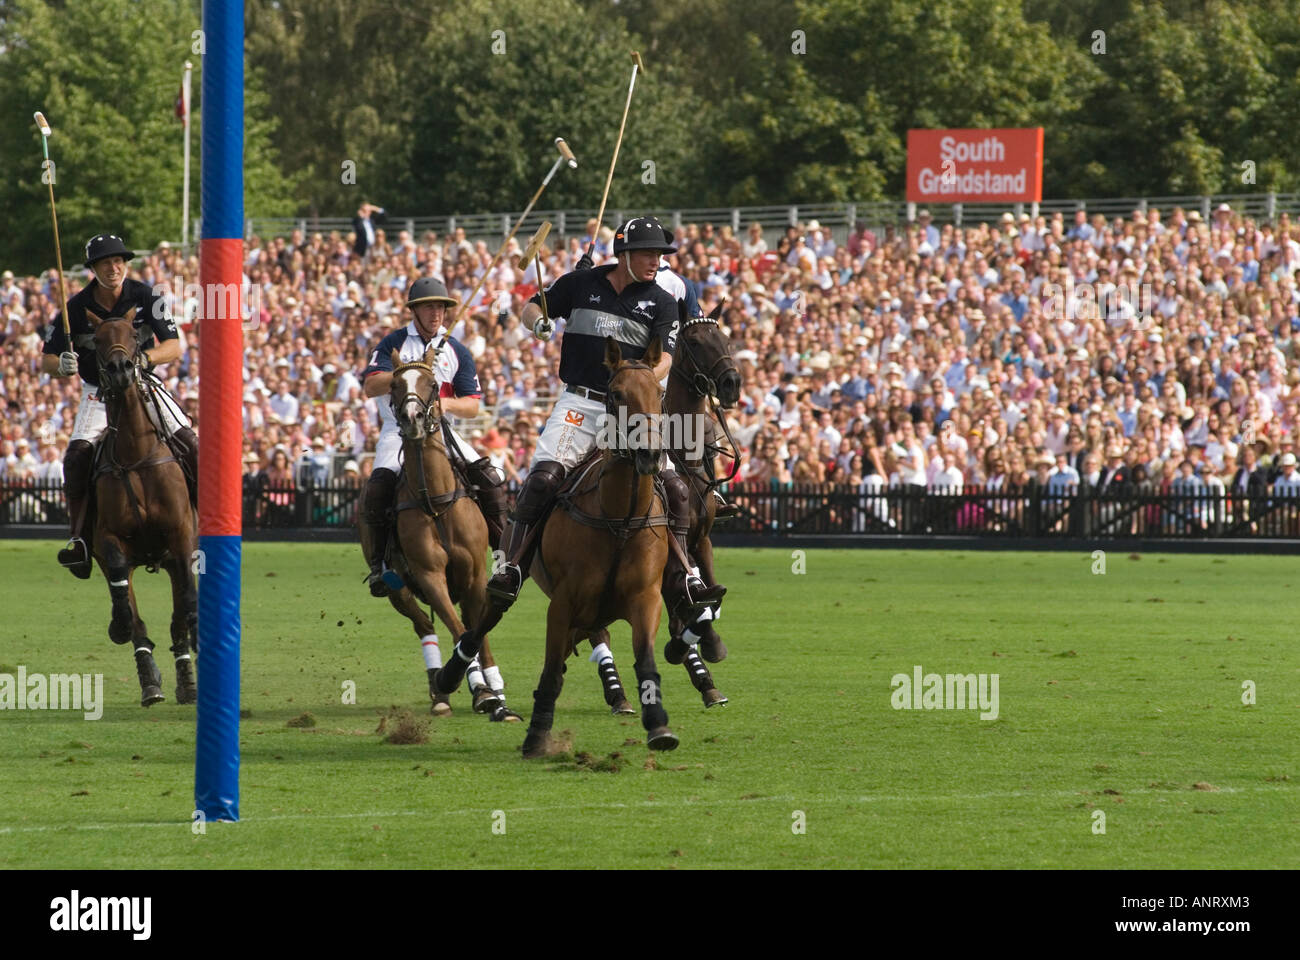 Polo Cartier International Polo at the Guards Club Smiths Lawn Windsor Great Park Egham Surrey England 2000s 2006 HOMER SYKES Stock Photo